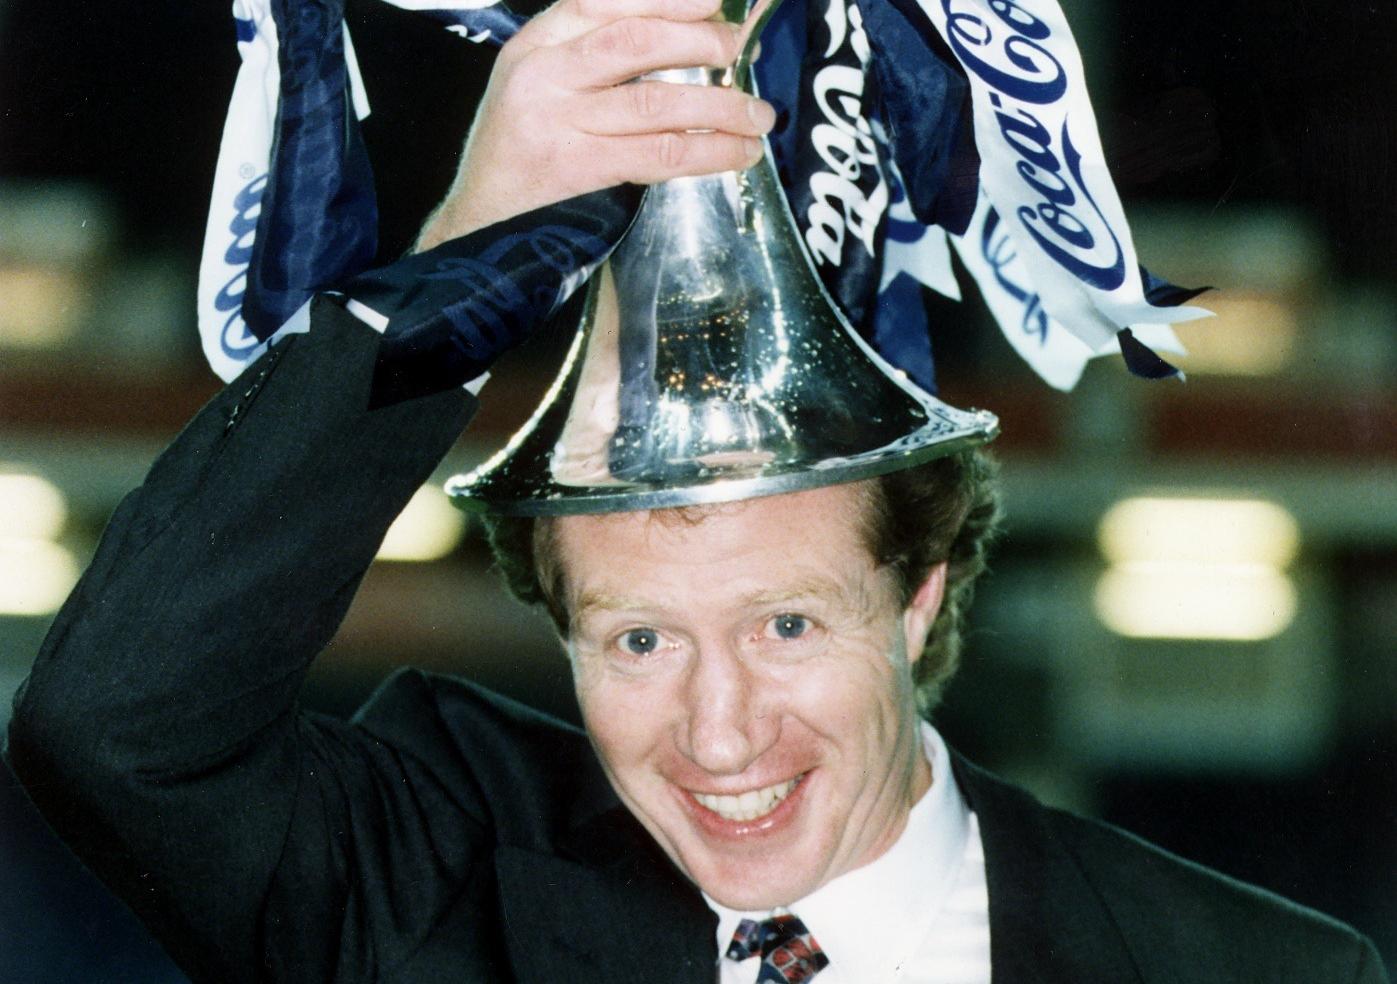 Celtic v Raith Rovers, Coca Cola Cup final. Raith Rovers manager Jimmy Nicholl celebrating his team winning the cup.